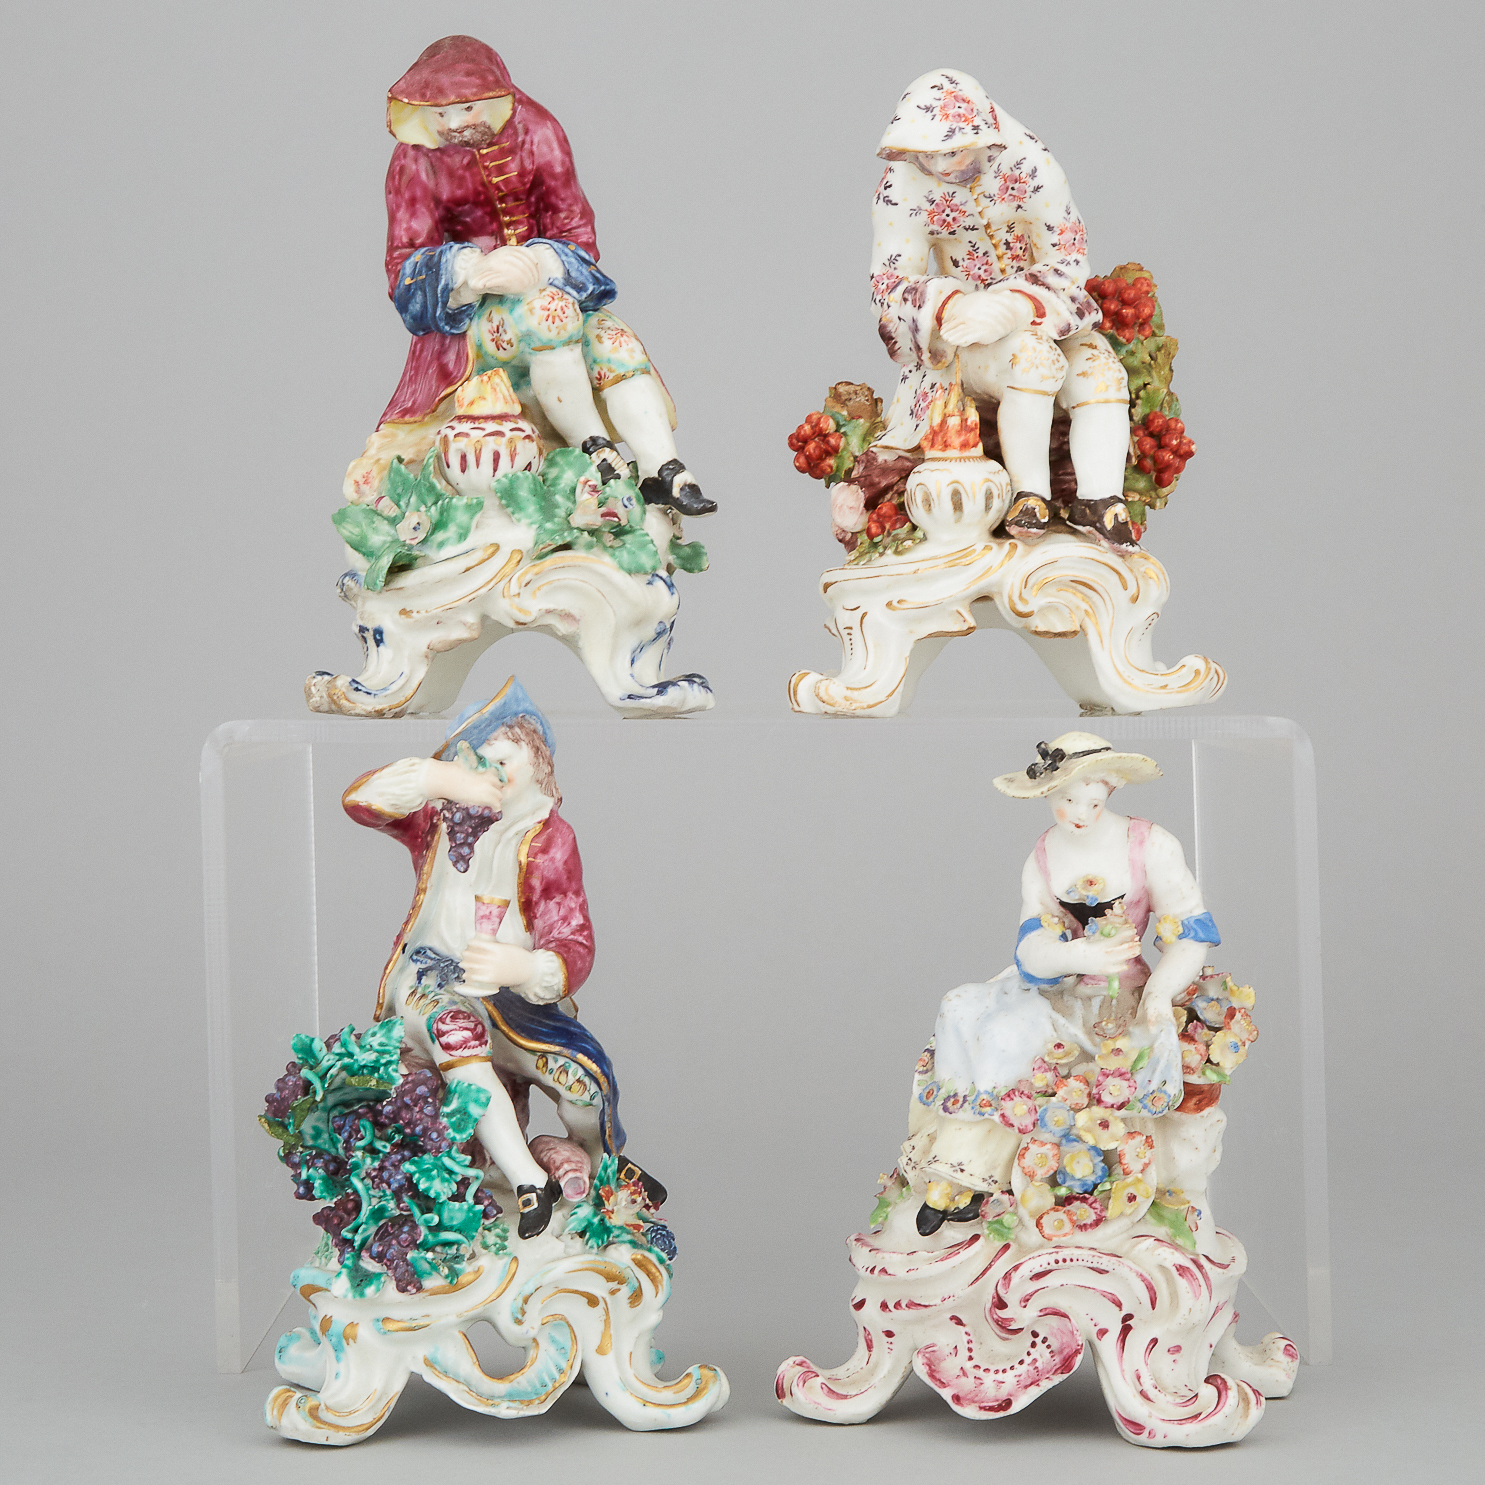 Assembled Group of Four Bow Figures Emblematic of the Seasons, c.1765